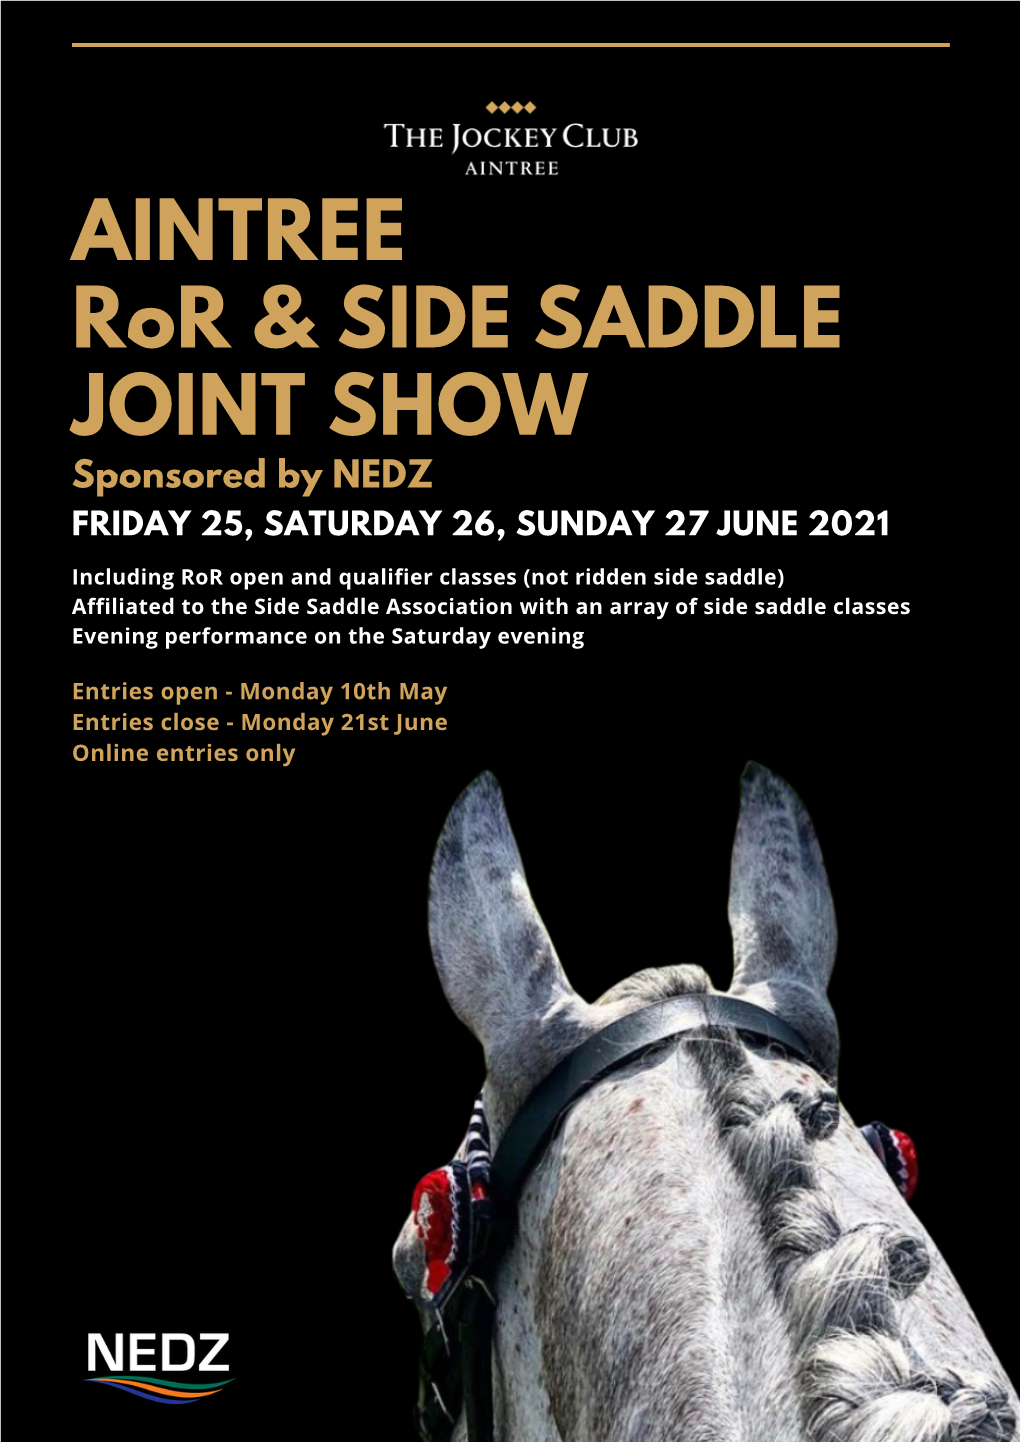 AINTREE Ror & SIDE SADDLE JOINT SHOW